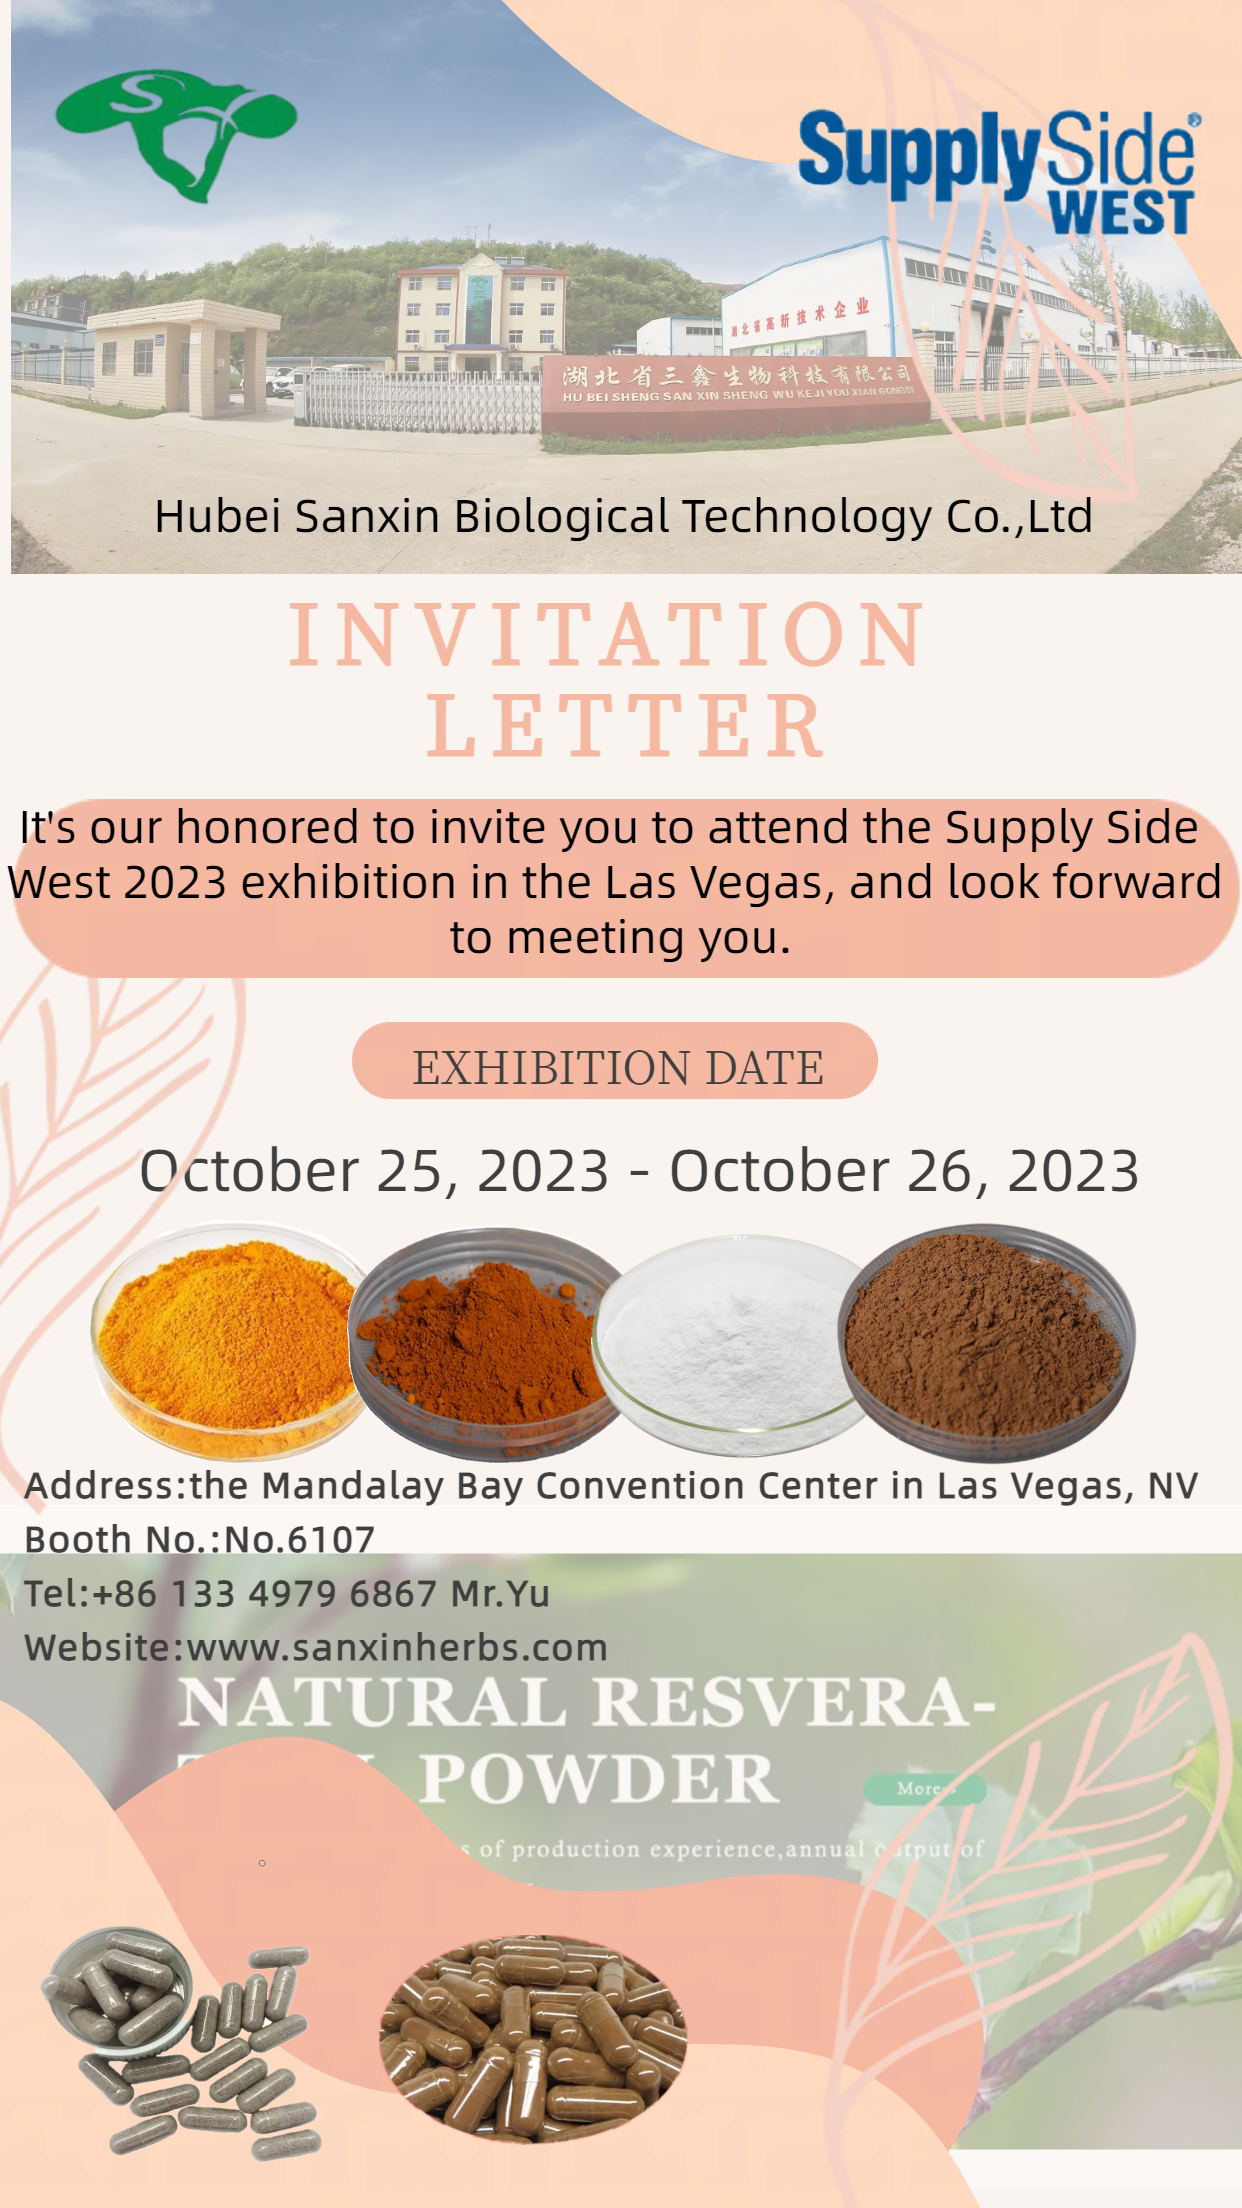 2023 SUPPLY SIDE WEST EXHIBITION IN LAS VEGAS.png